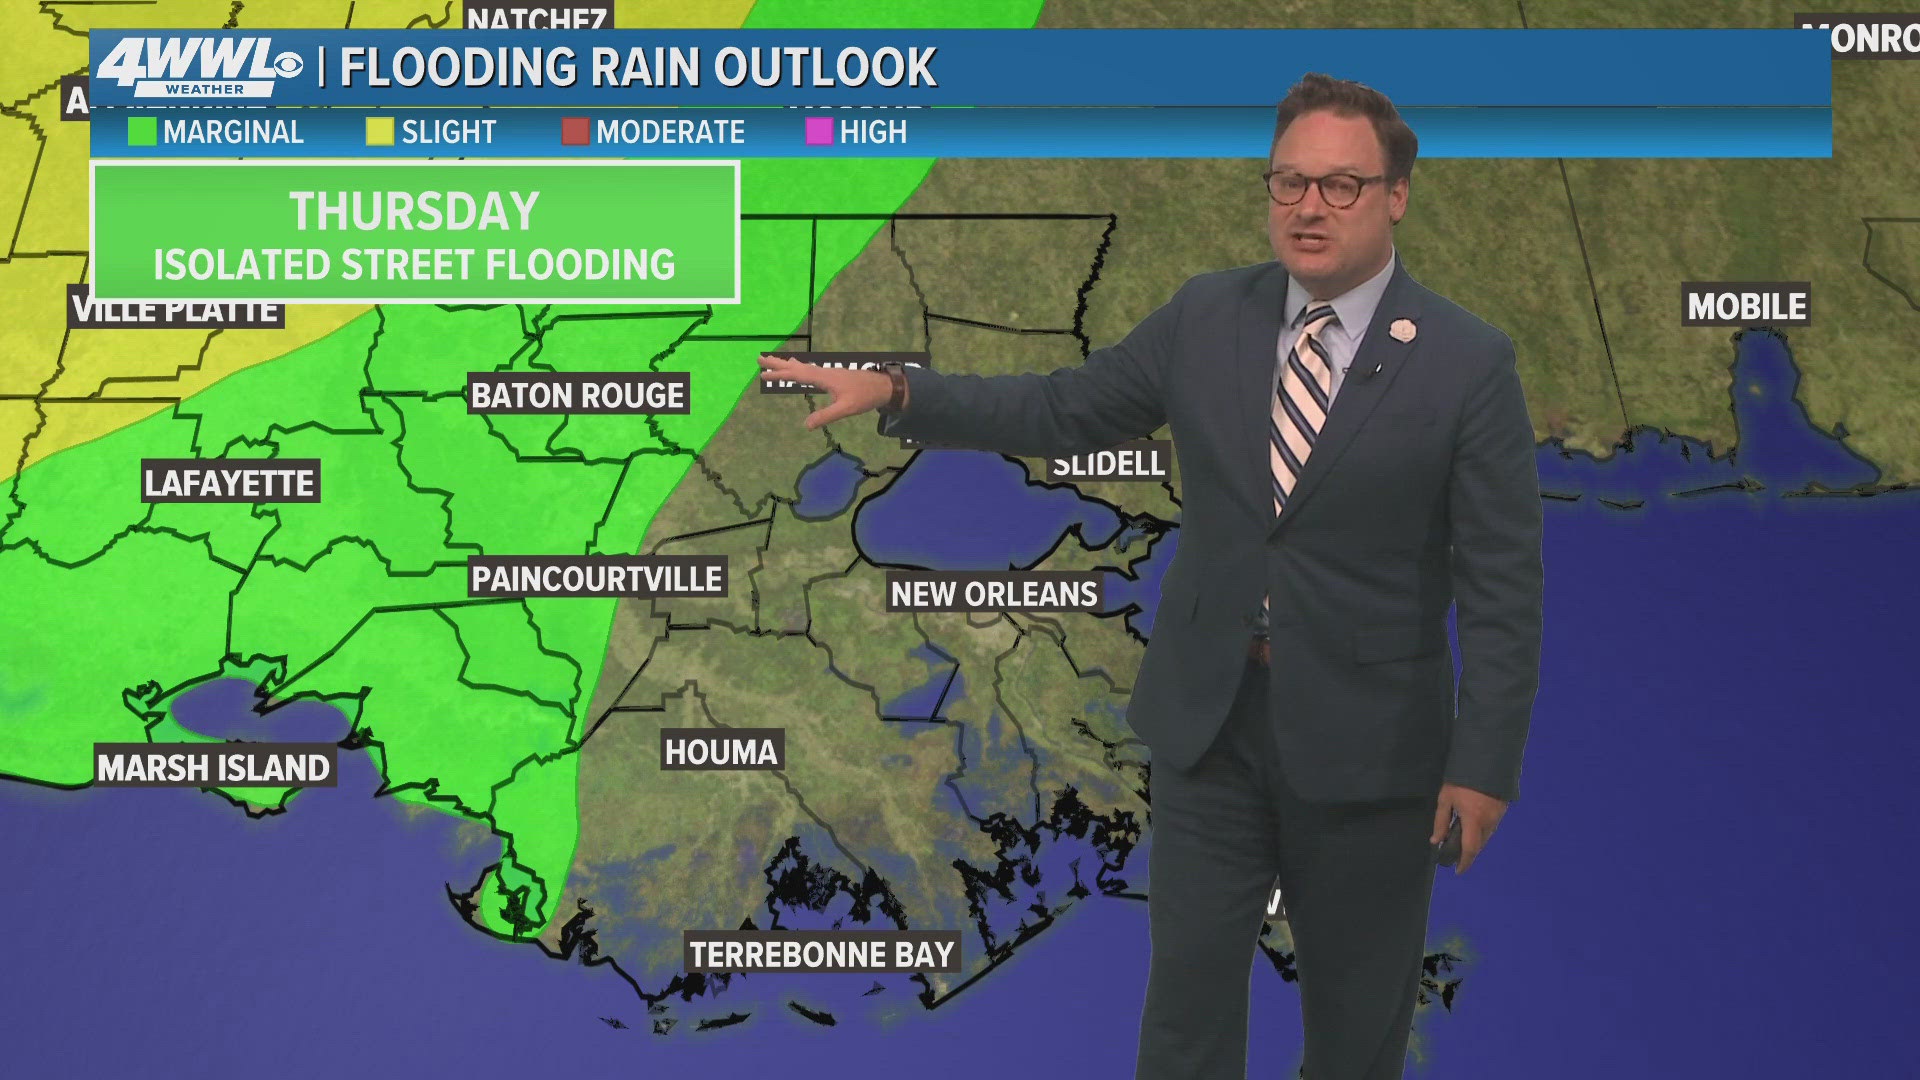 Chief Meteorologist Chris Franklin says there's a slight chance for rain on Thursday with more possible showers Friday. A dry weekend ahead.